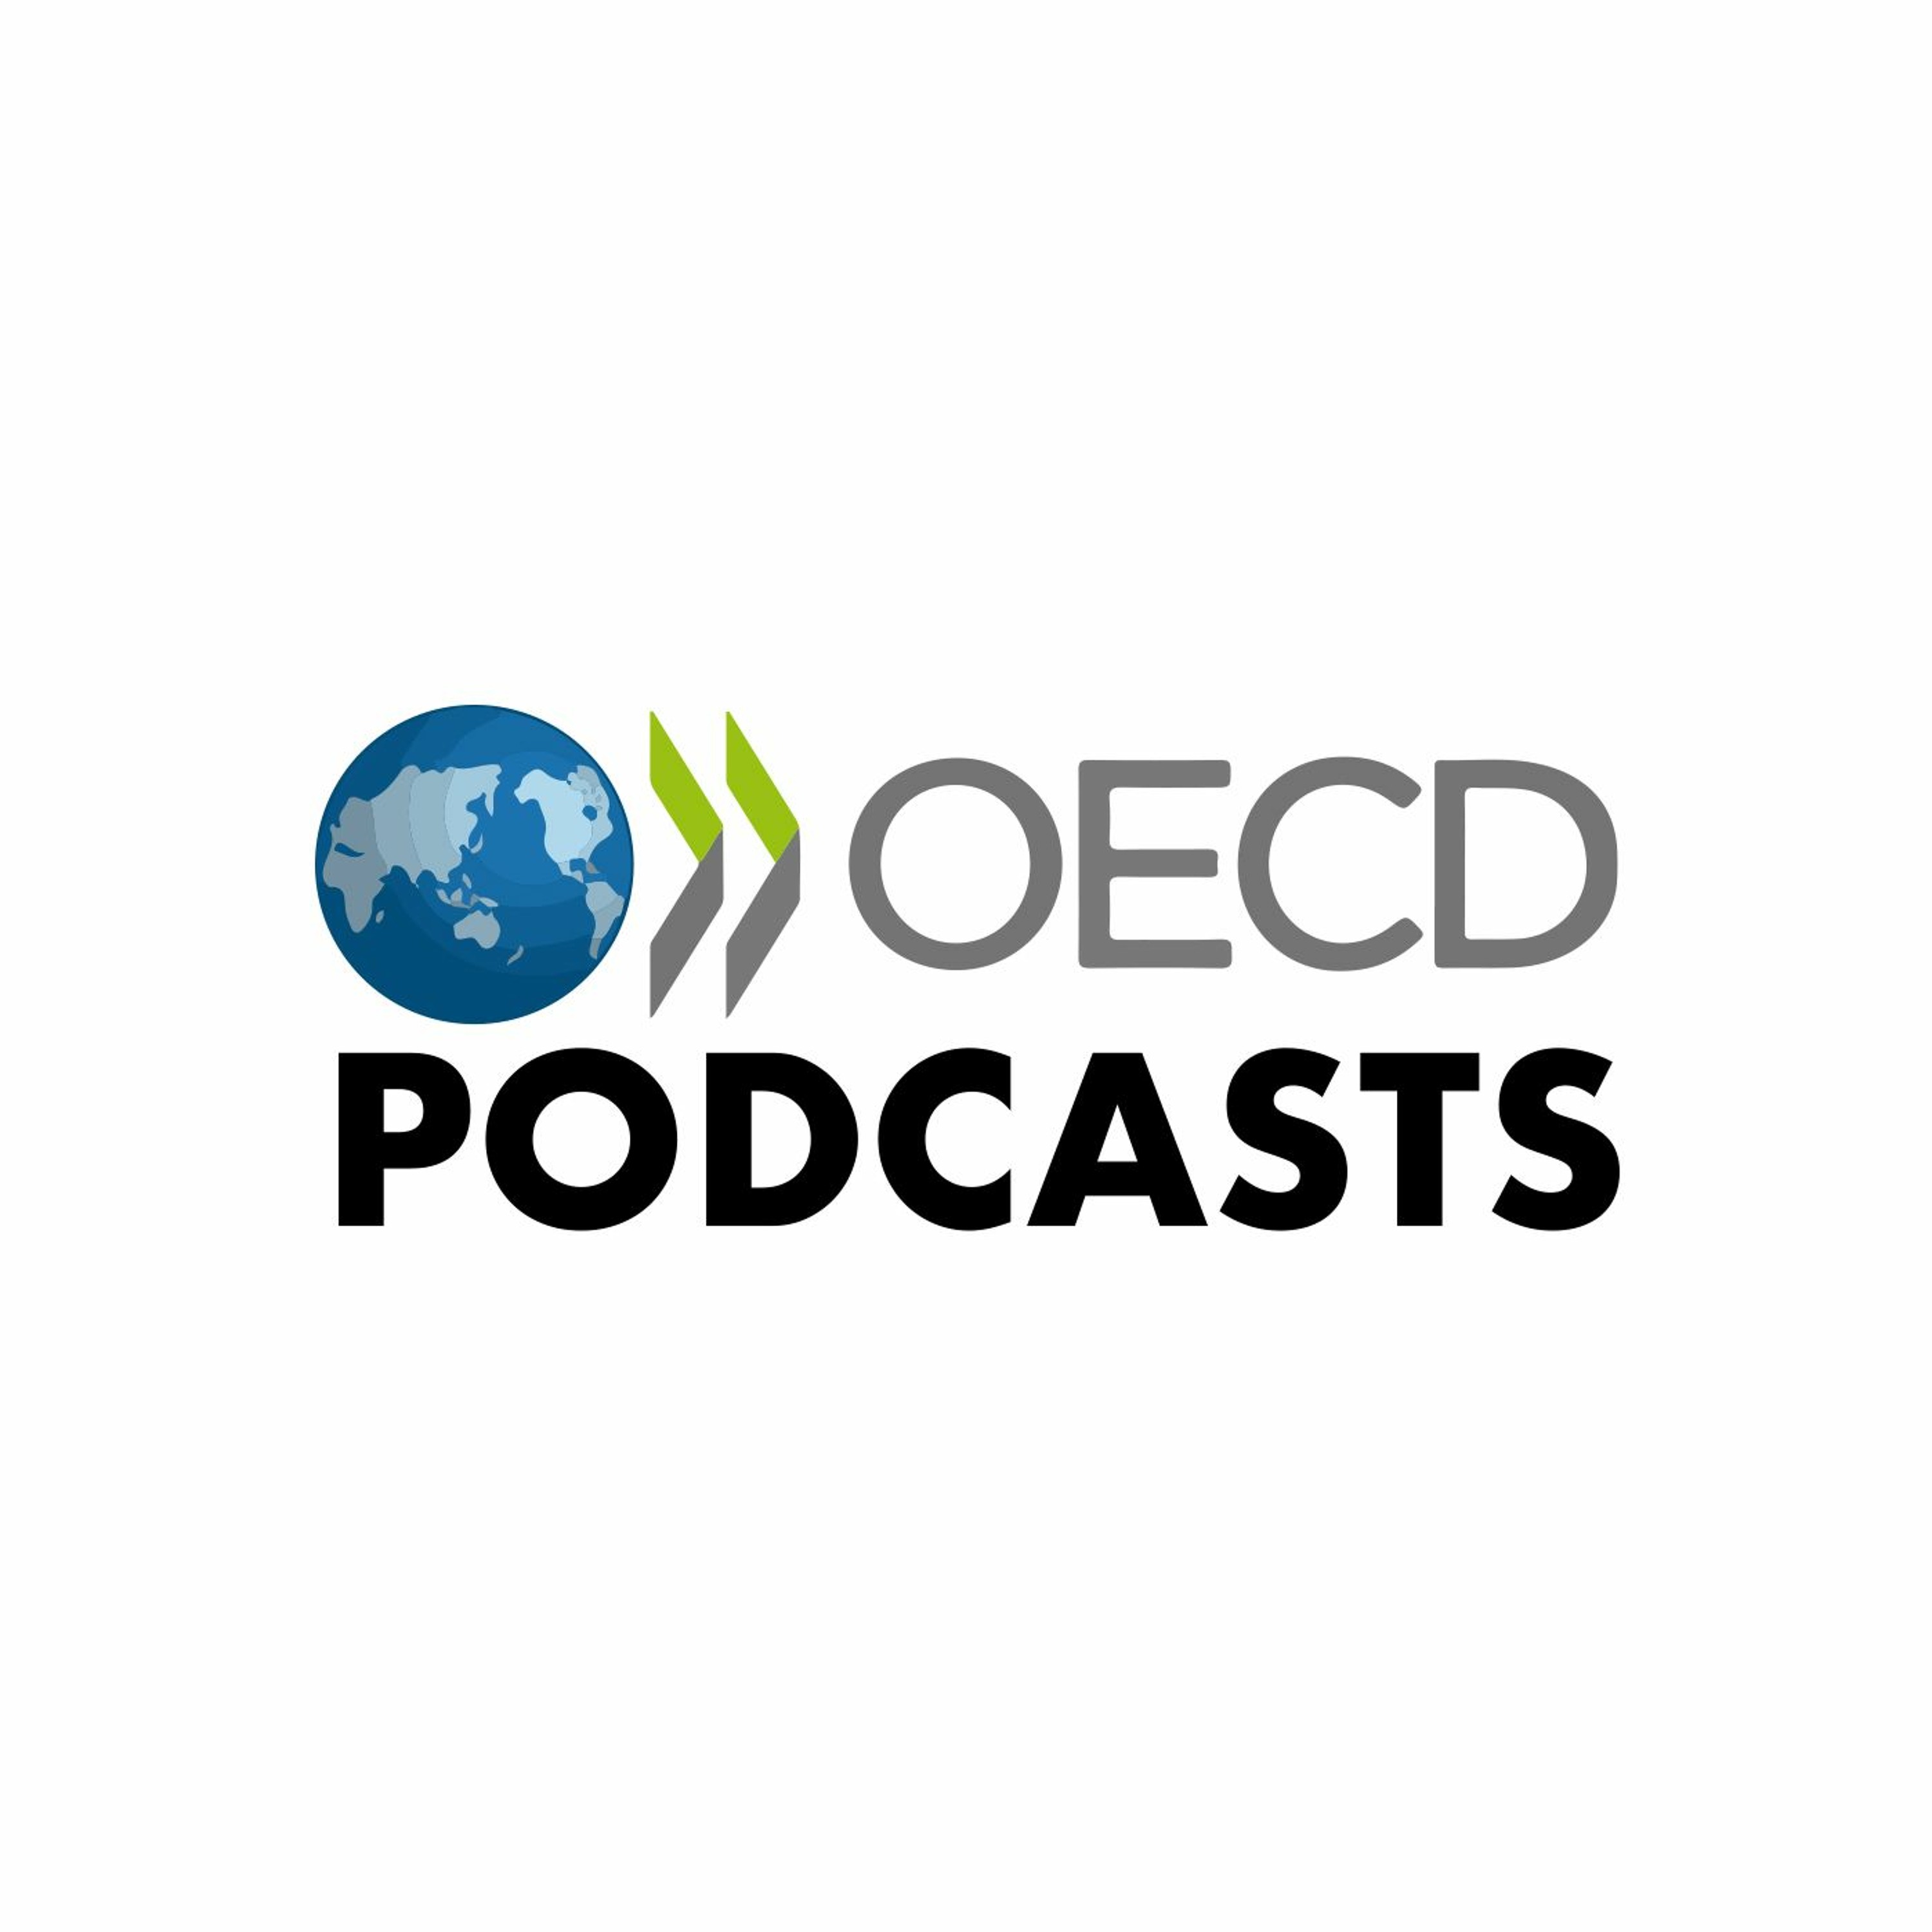 OECD Podcasts 2022 Year in Review